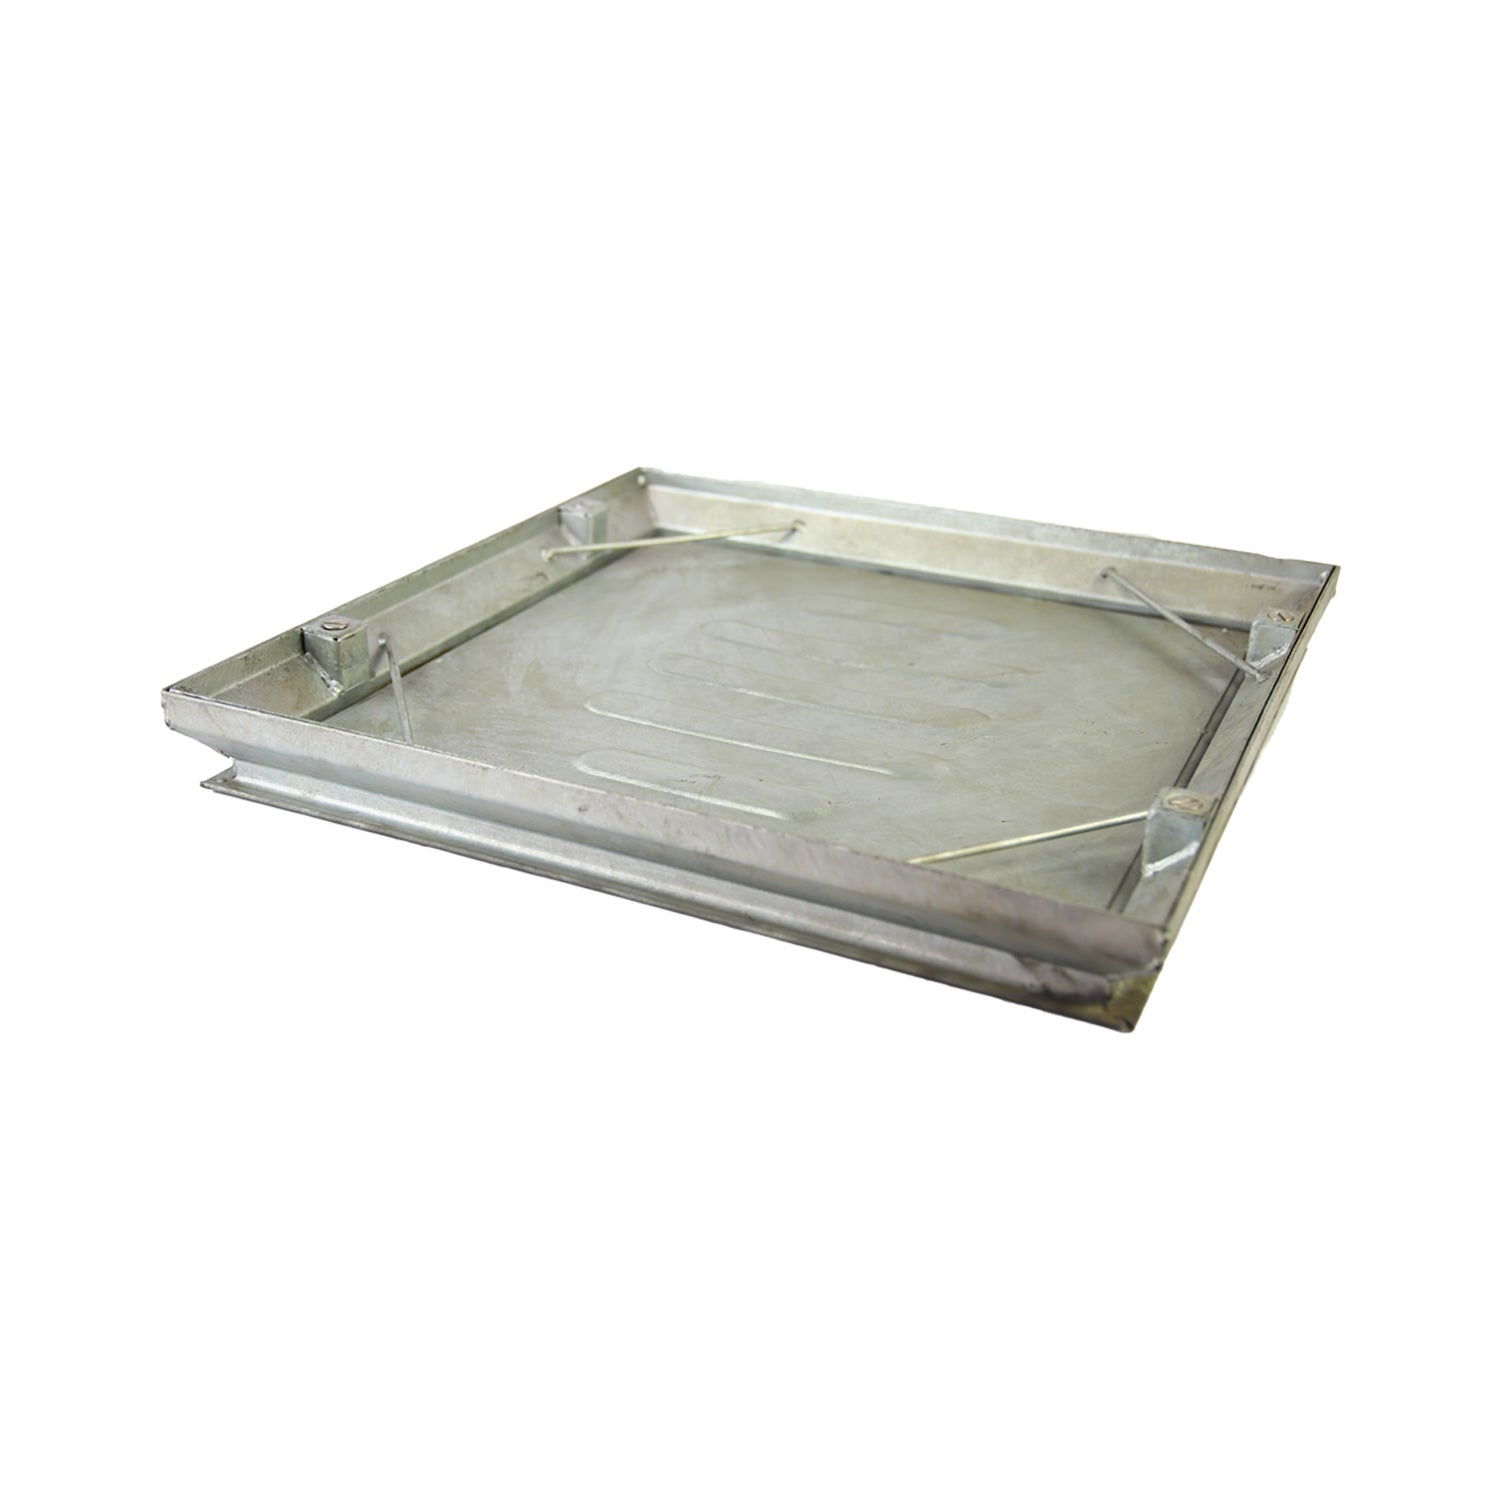 Double Seal Tray Type Manhole Cover 600mm x 600mm